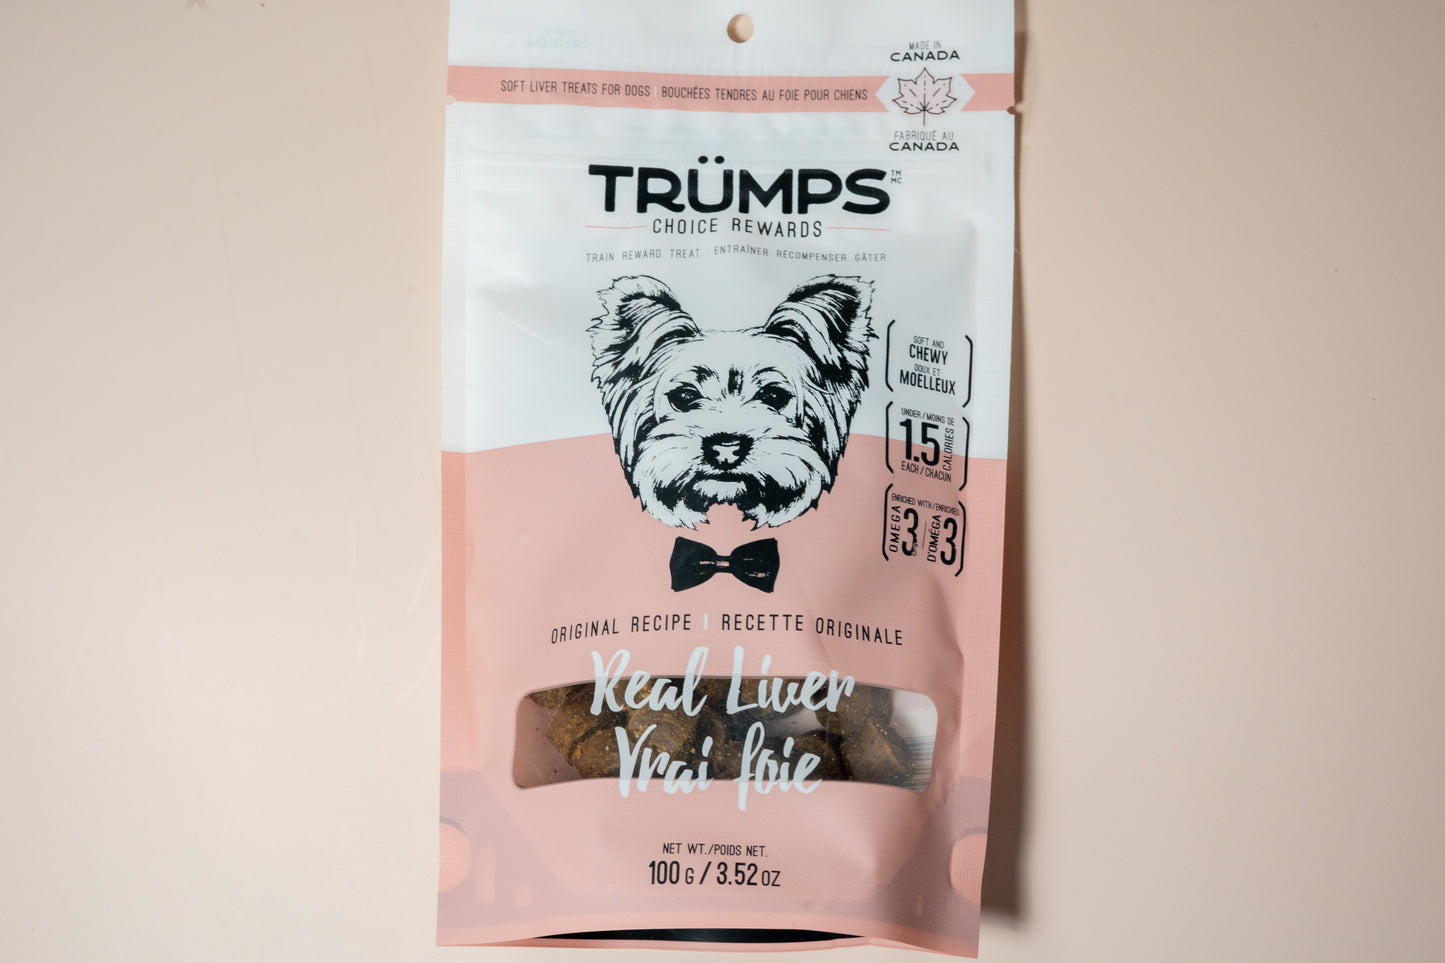 Trumps real liver for dogs is a soft and chewy treat under 1.5 calories each bite and enrobed with omega 3.